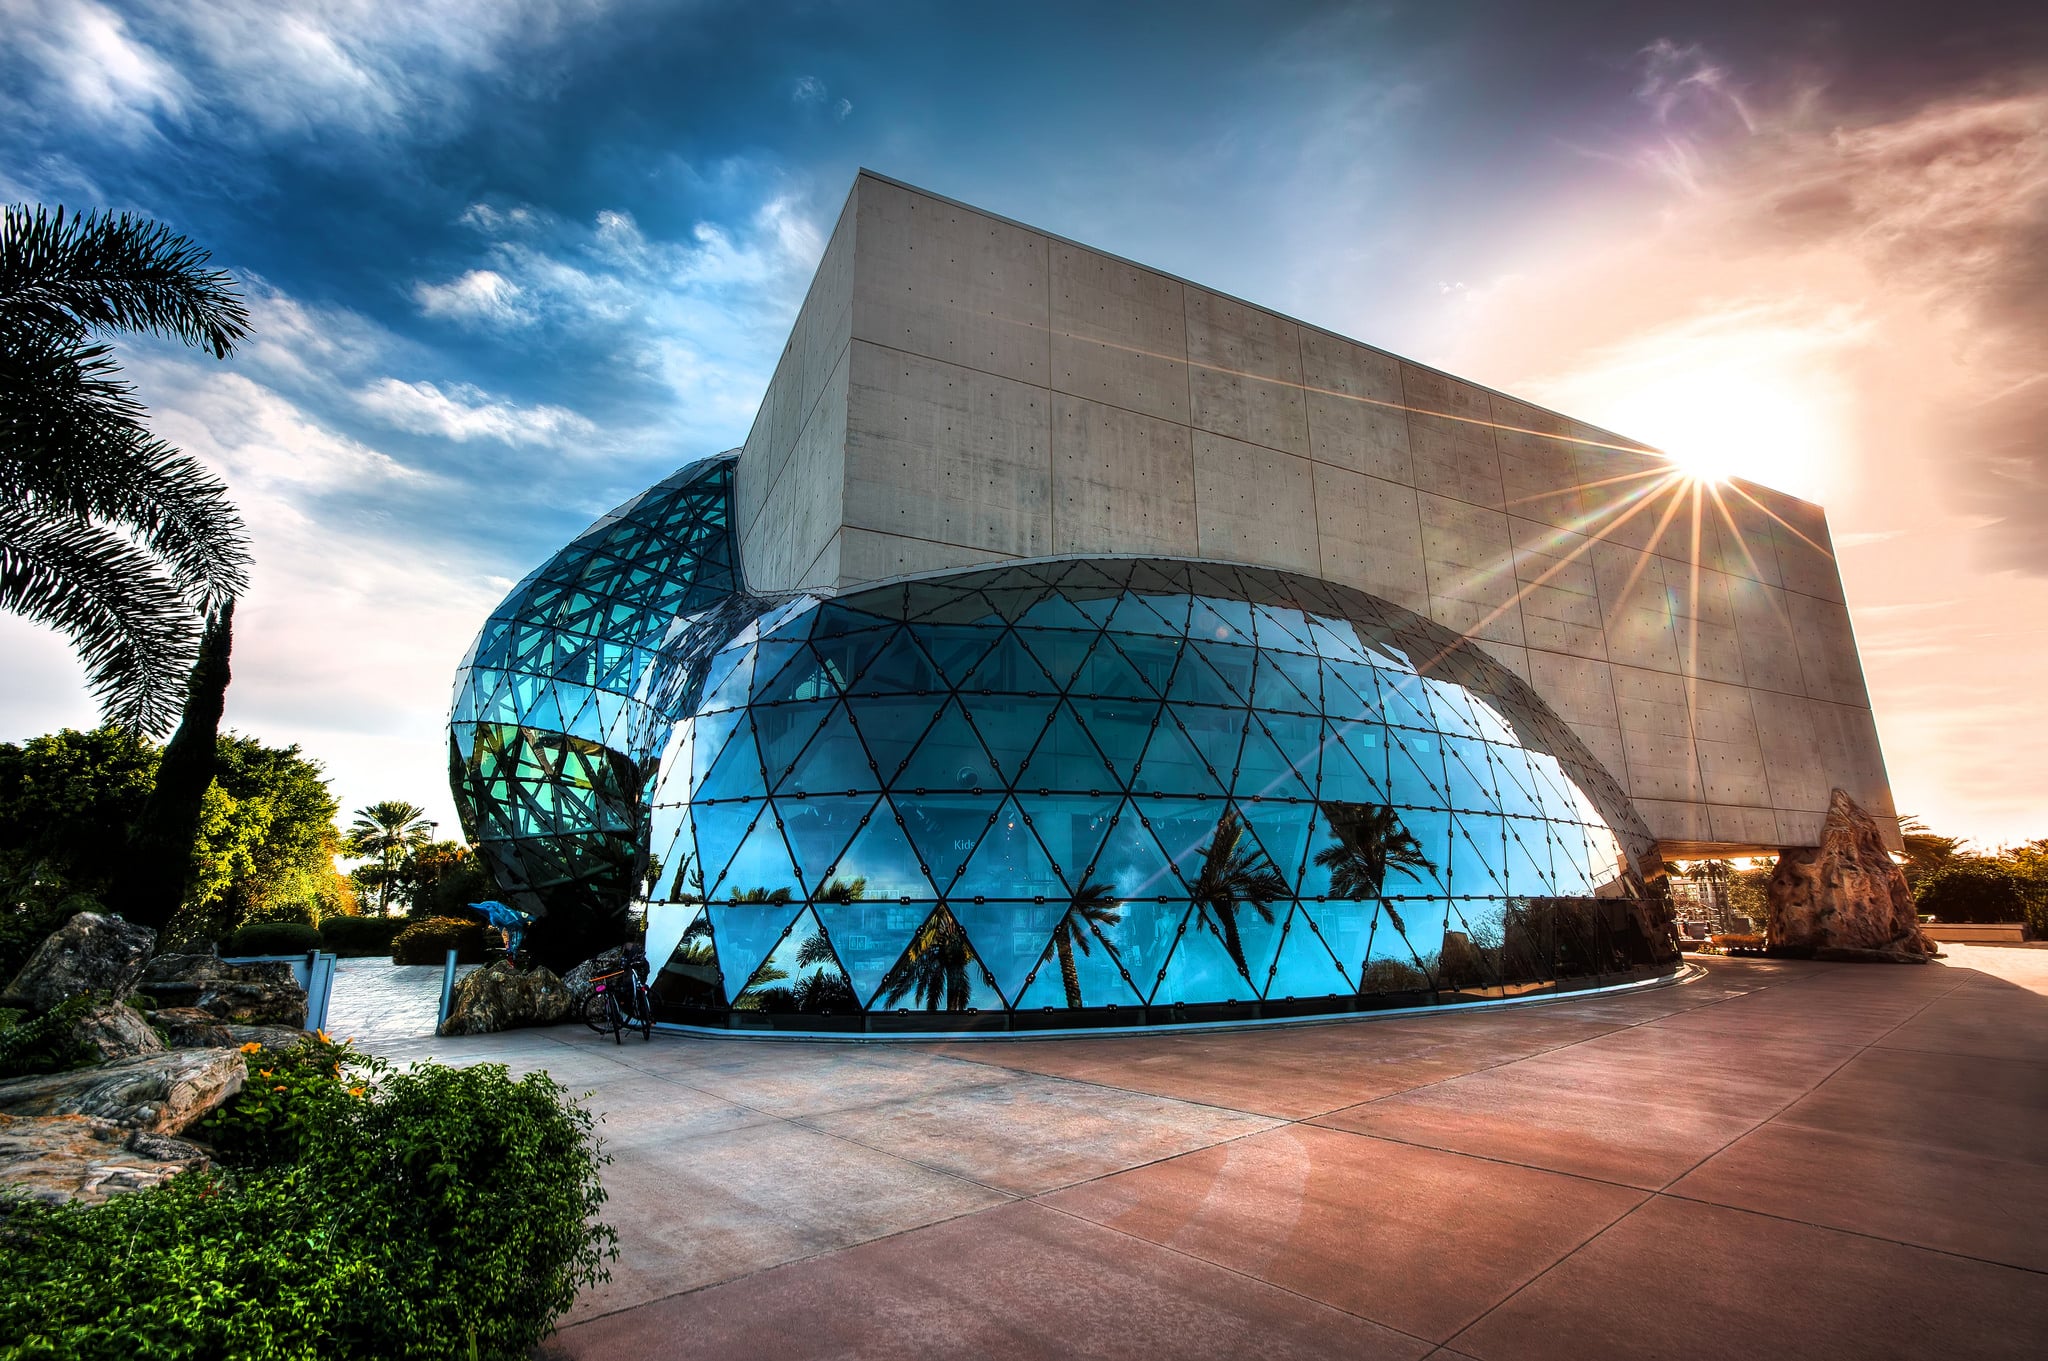 Traveling in USA: the Salvador Dali Museum, St Petersburg, FL